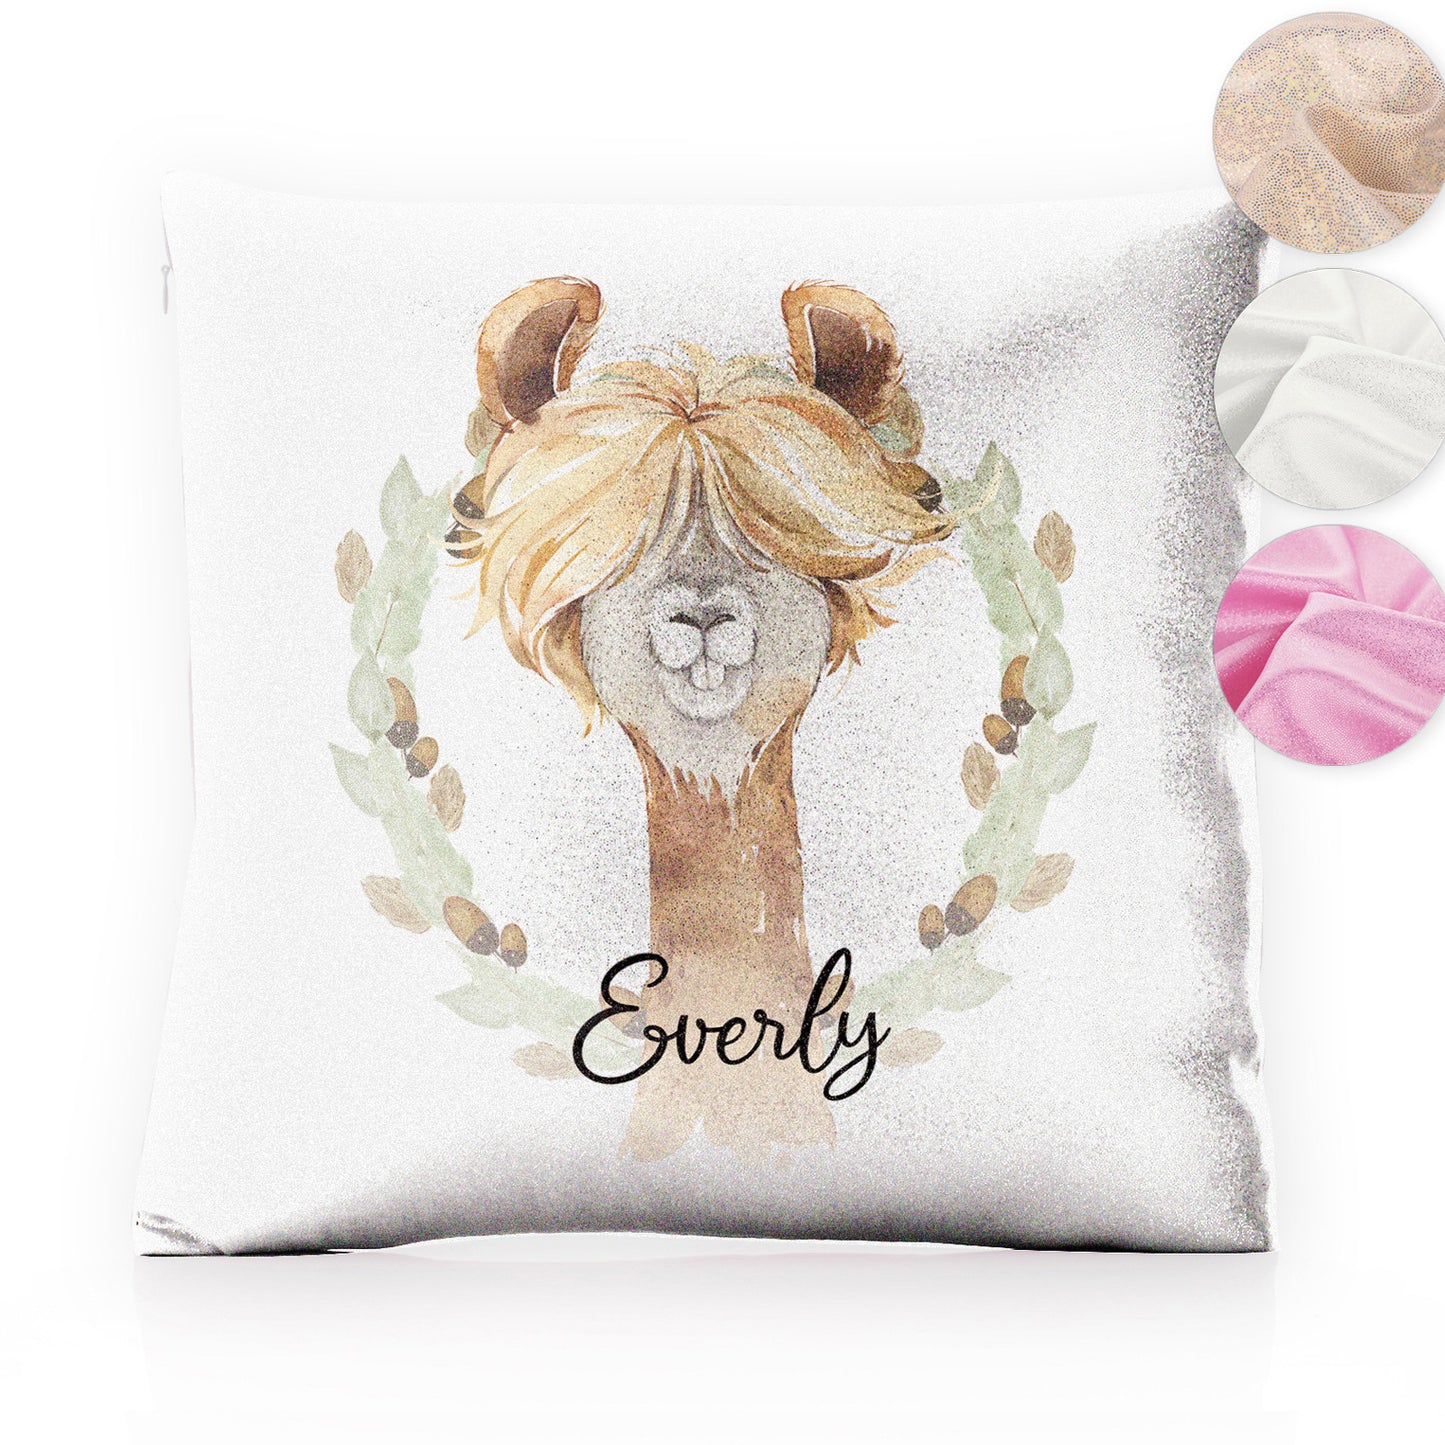 Personalised Glitter Cushion with Brown Alpaca Acorn Wreath and Cute Text